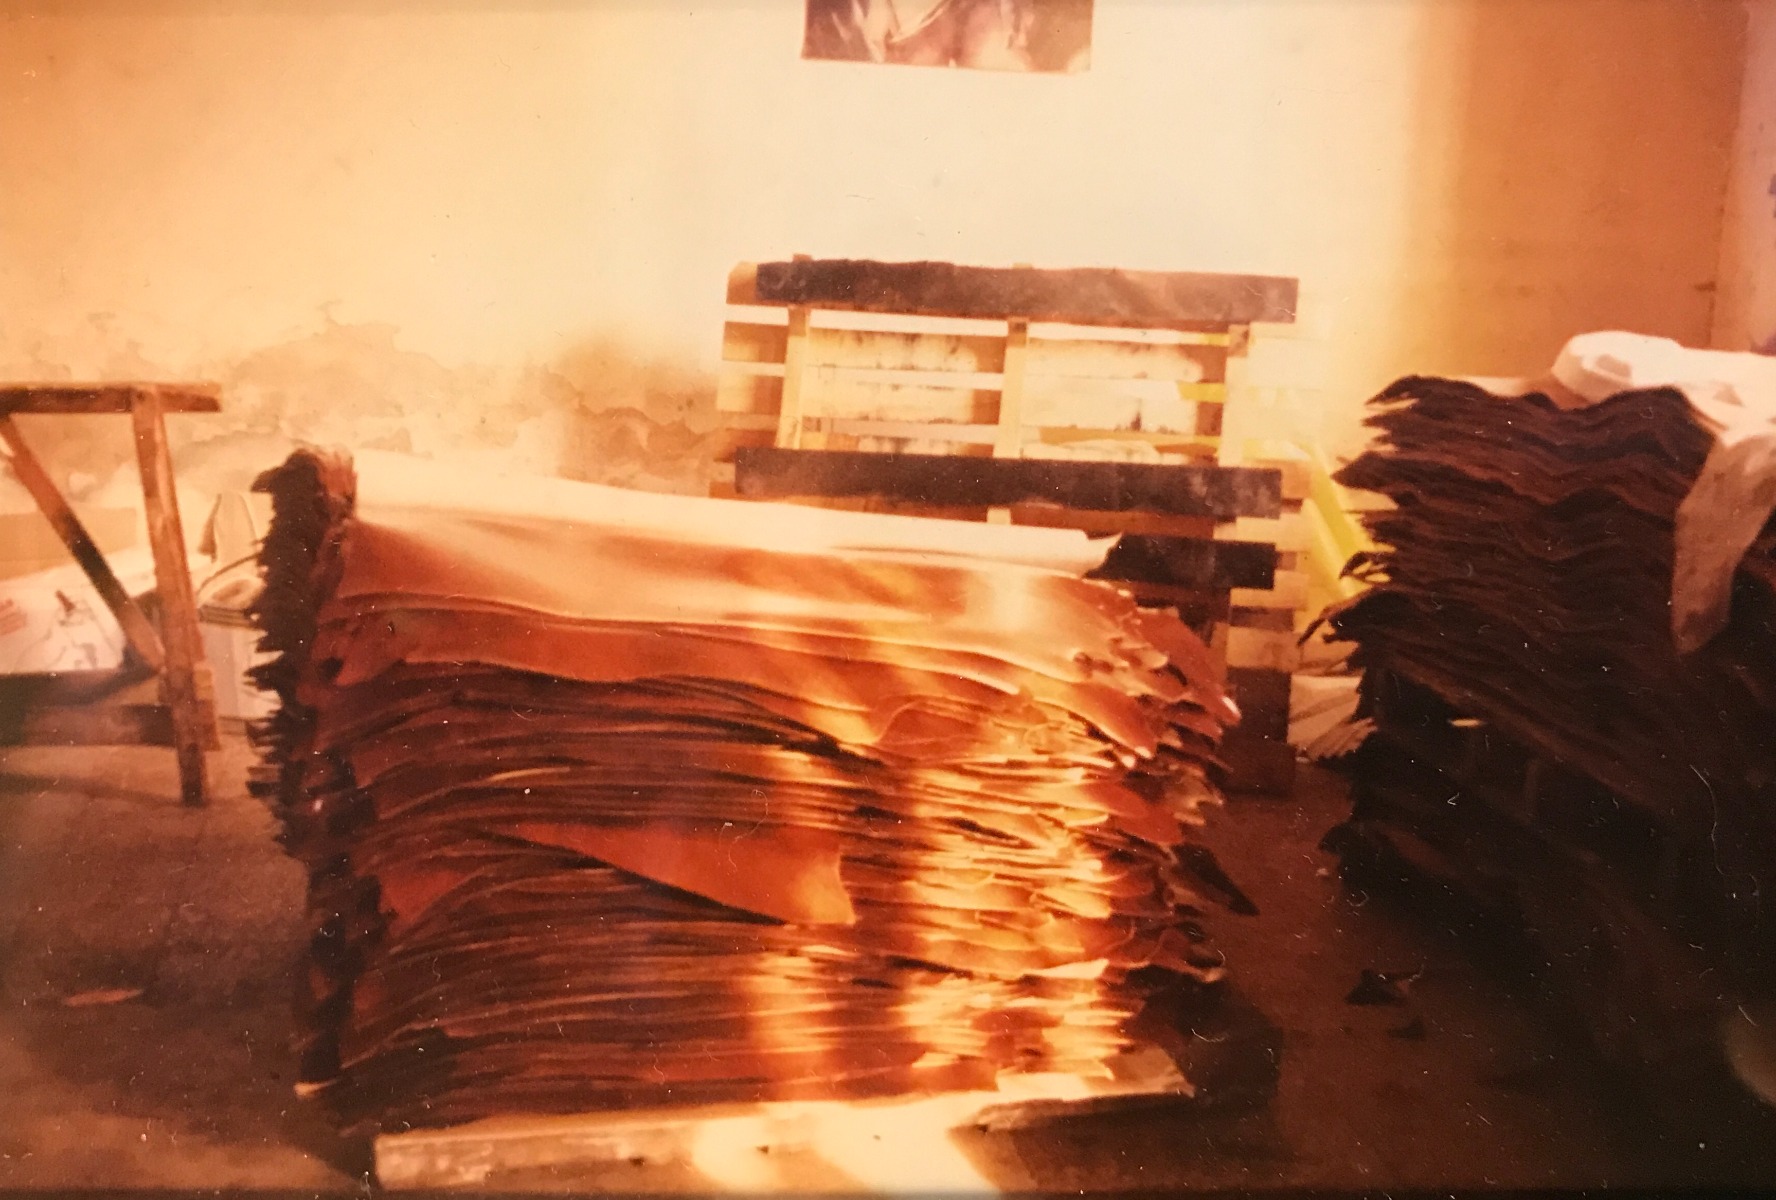 Hides being prepared for hand-staining circa 1960